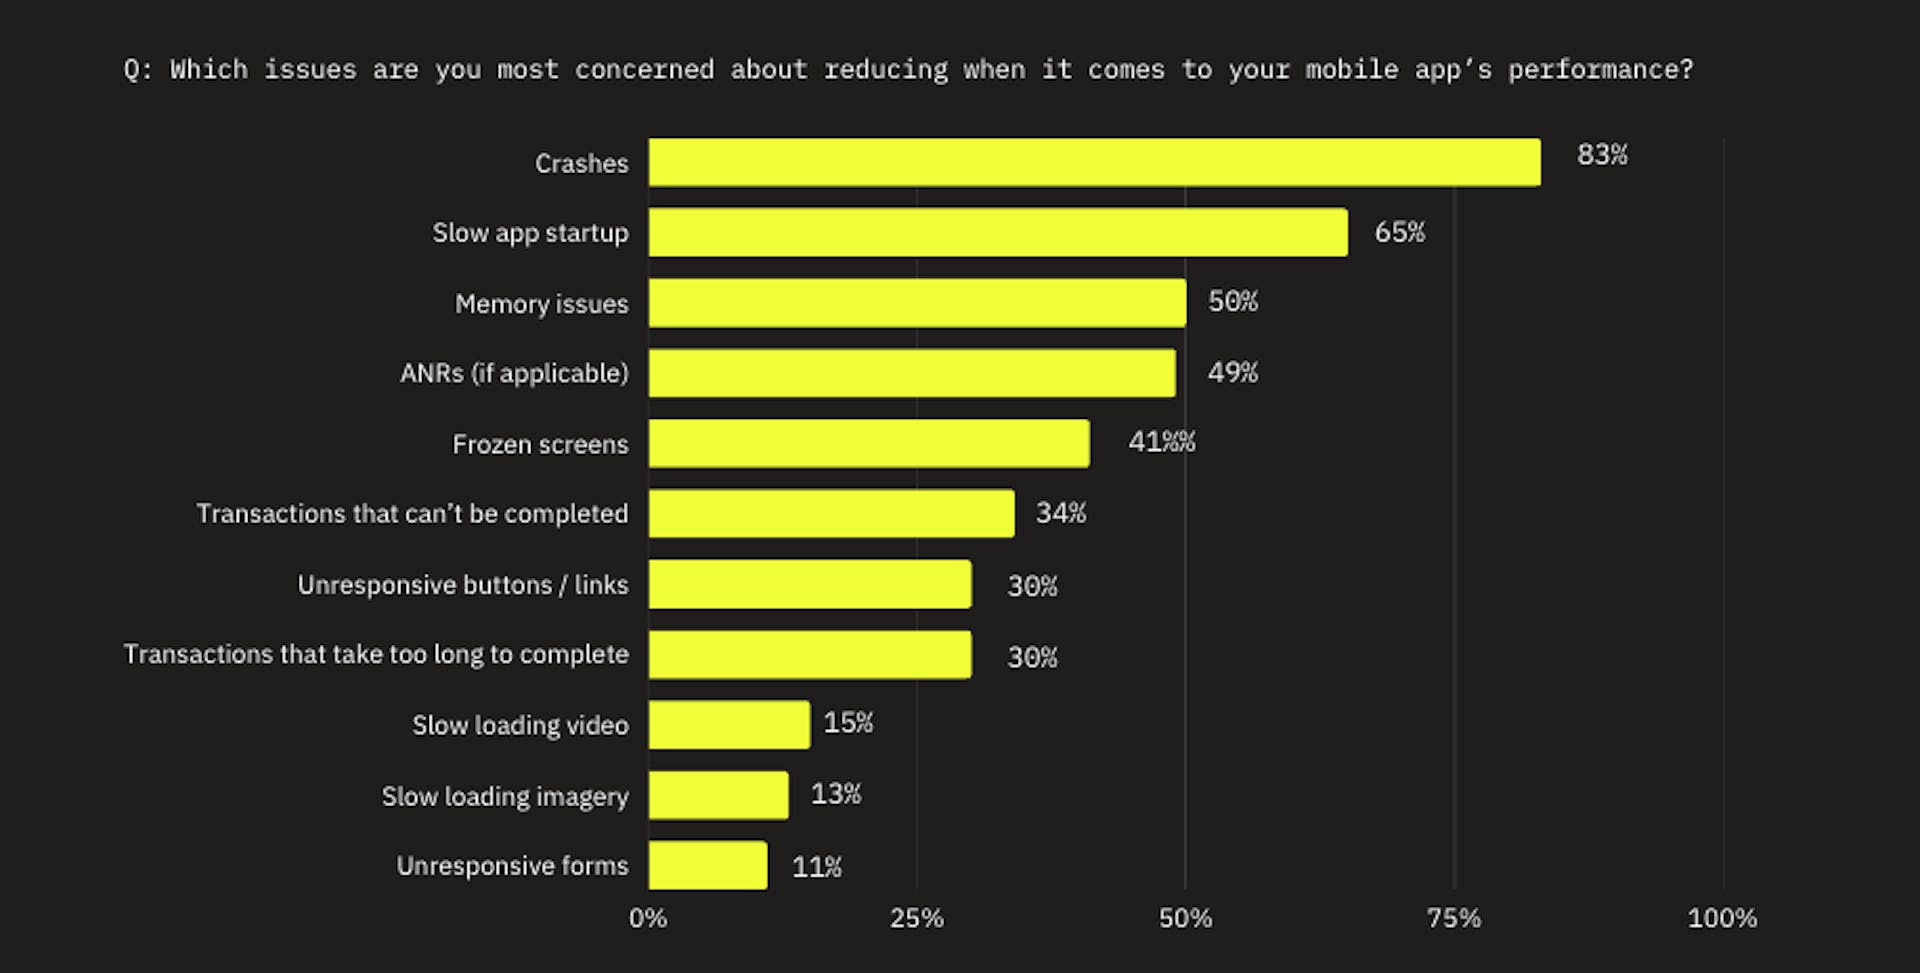 % of mobile engineers who say they are most concerned with the following issues when it comes to their app's performance